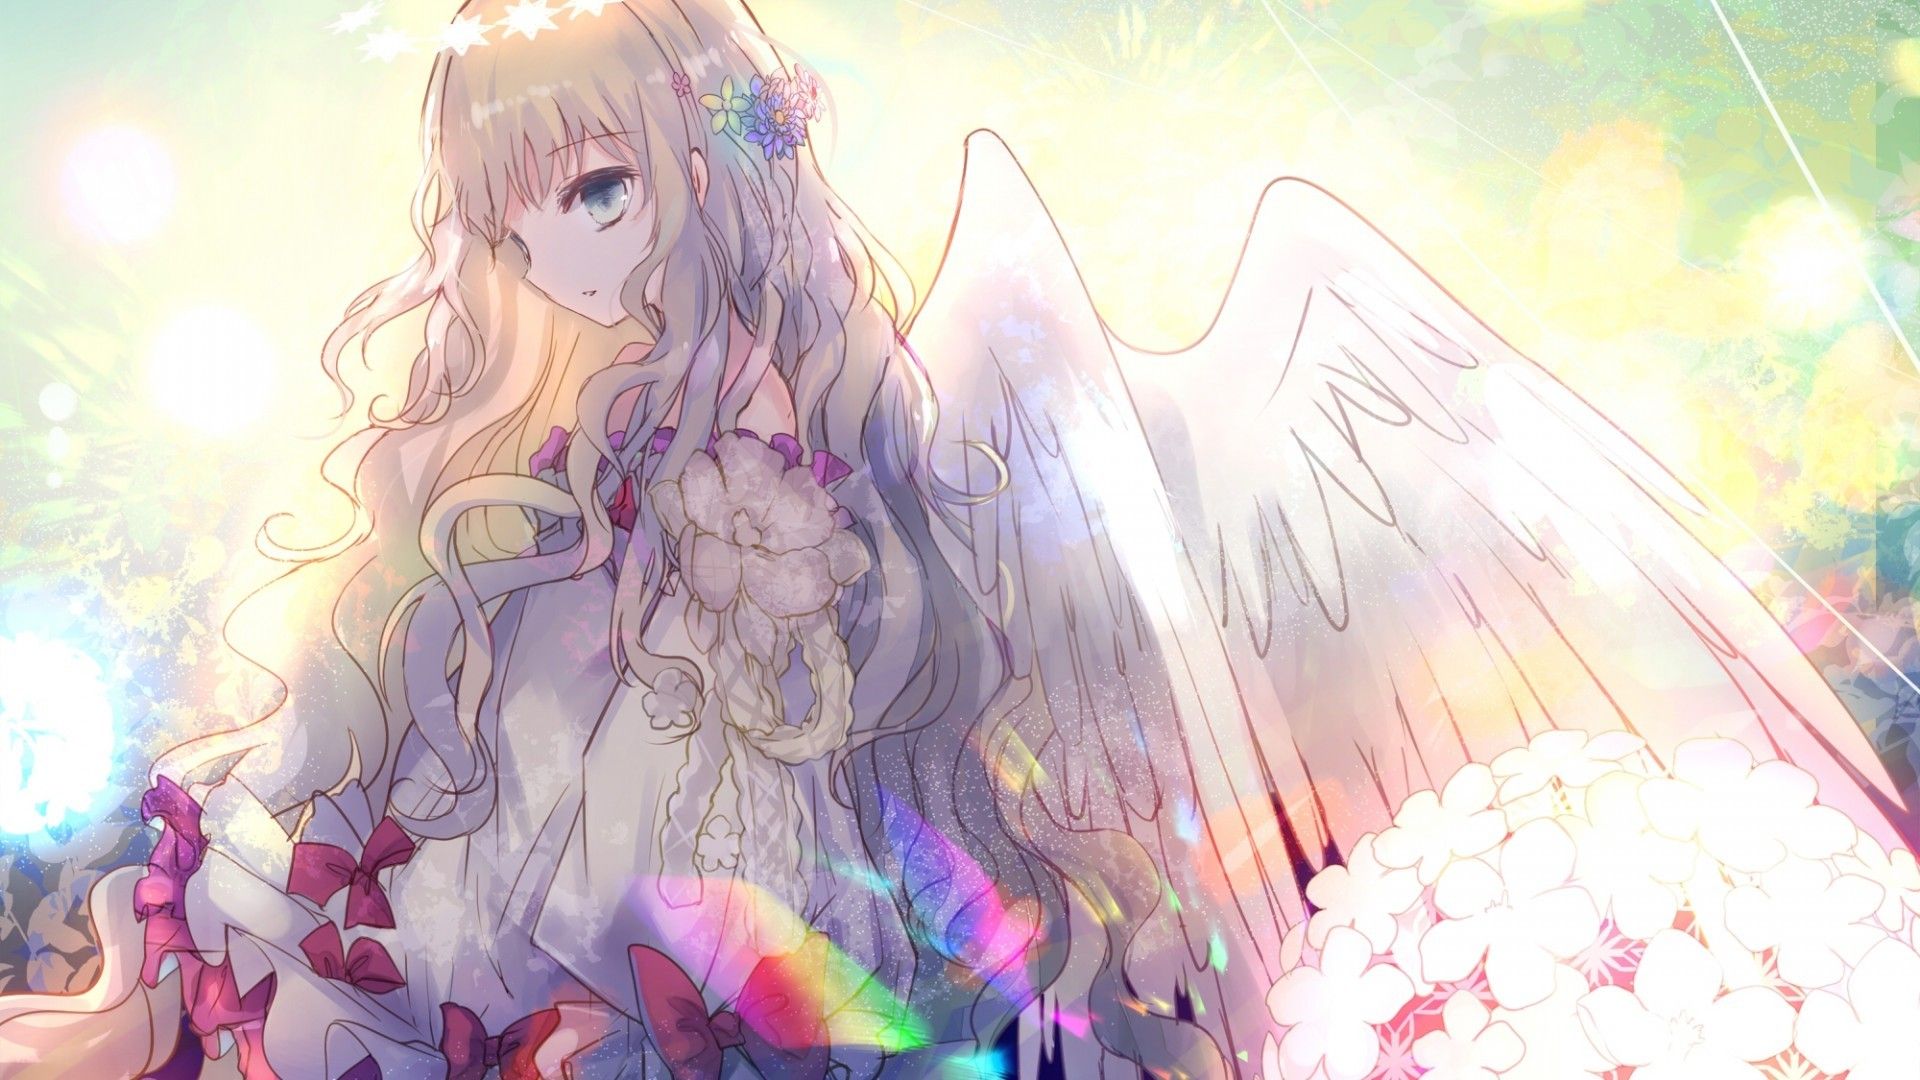 Download 1920x1080 Angel, Wings, Anime Girl, Flowers, Profile View